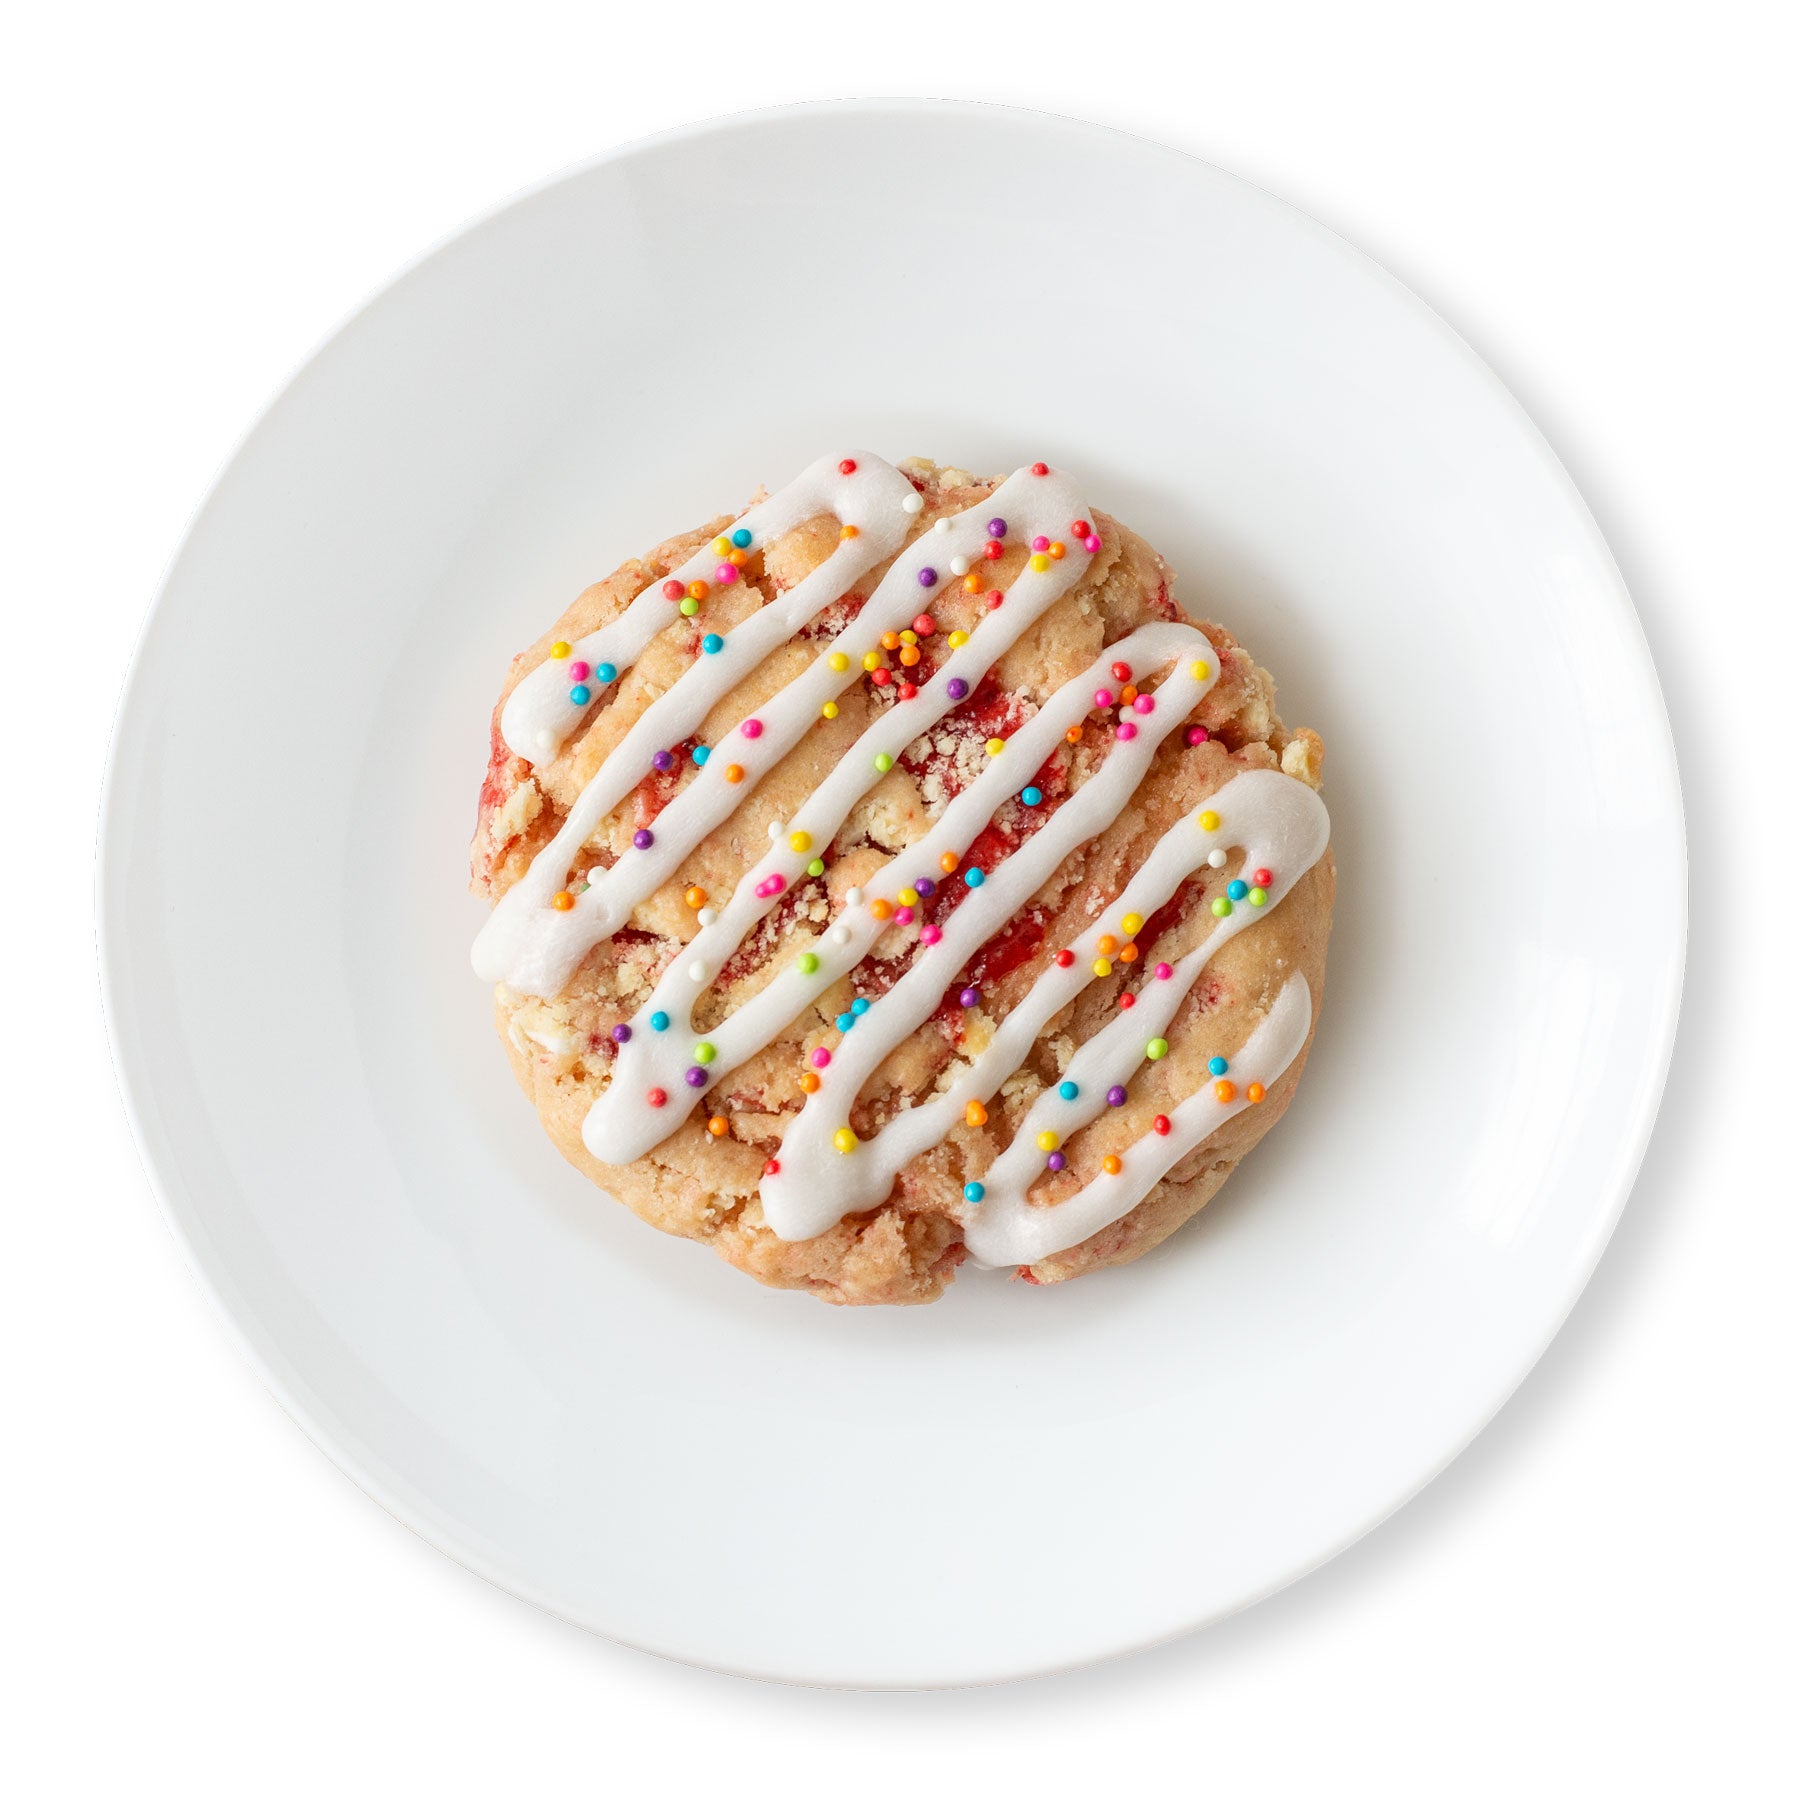 Close-up of a Strawberry Pop Tart Cookie topped with vanilla glaze and colorful nonpareils.